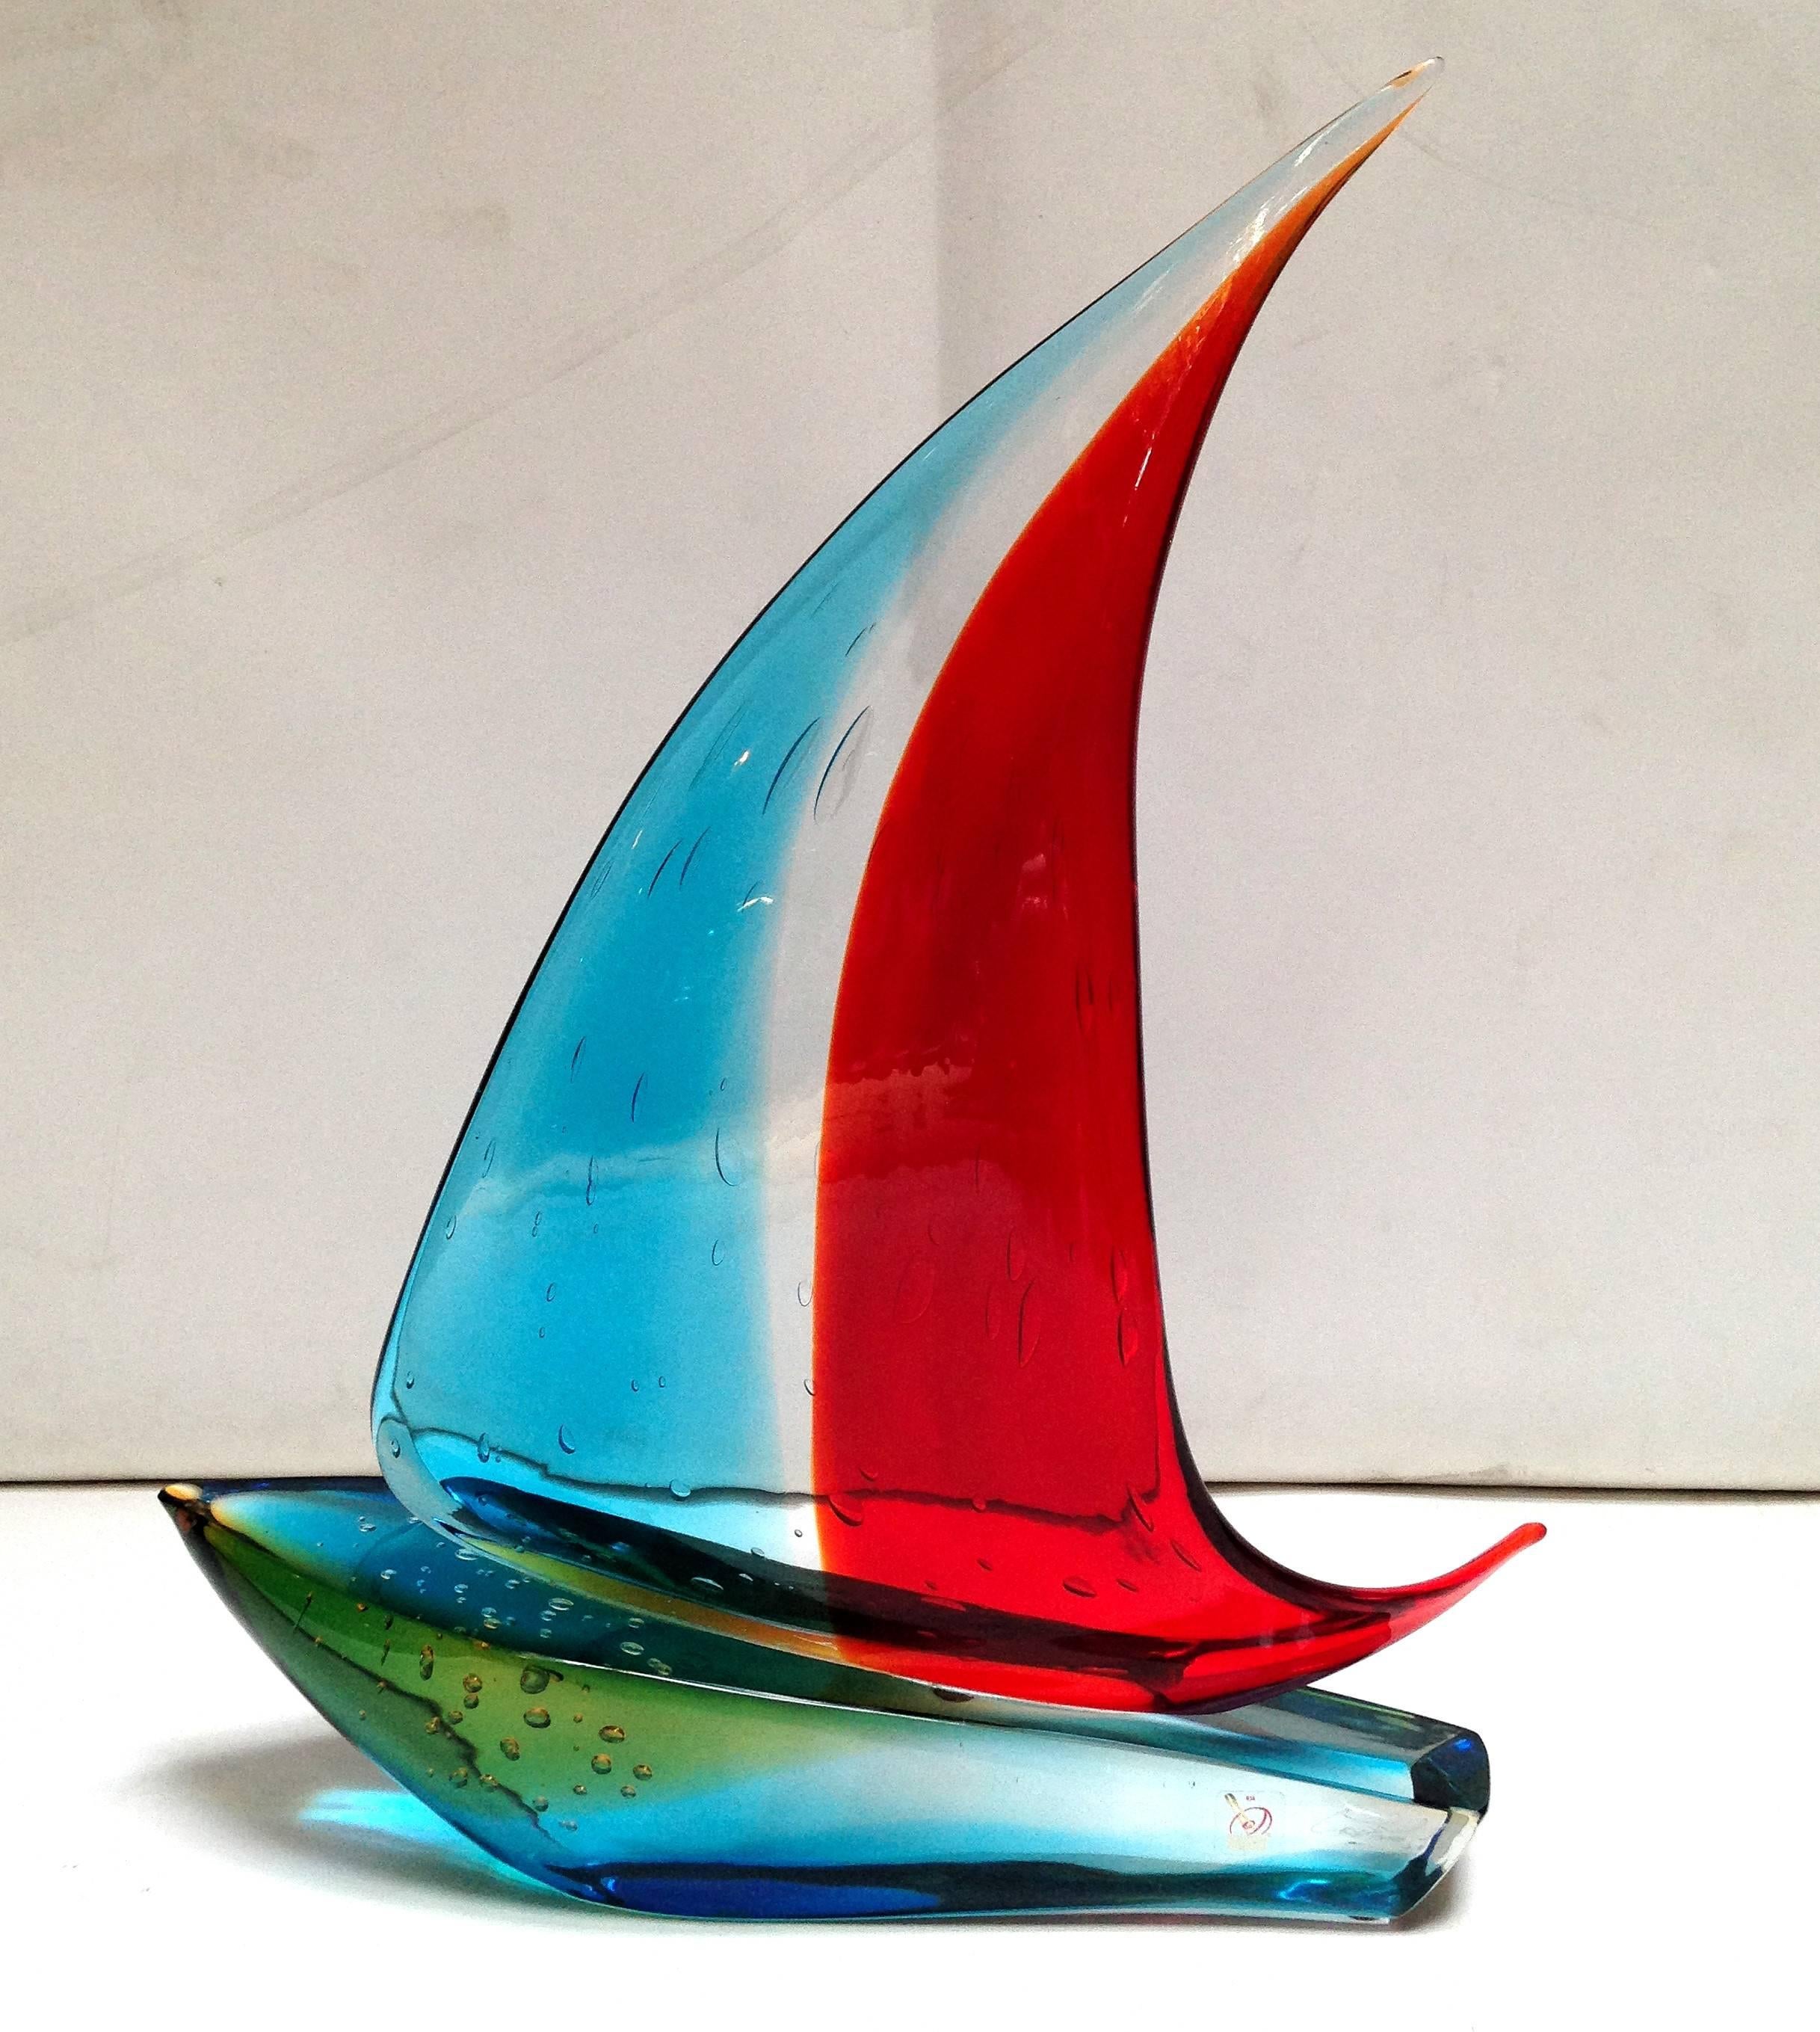 Vintage Italian single sail boat hand blown and crafted in red, blue, and yellow Murano glass by Sergio Constantini
Signed on the base / Made in Italy in the 1960’s 
Height: 19 inches / Width: 14.5 inches / Depth: 4 inches 
1 in stock in Palm